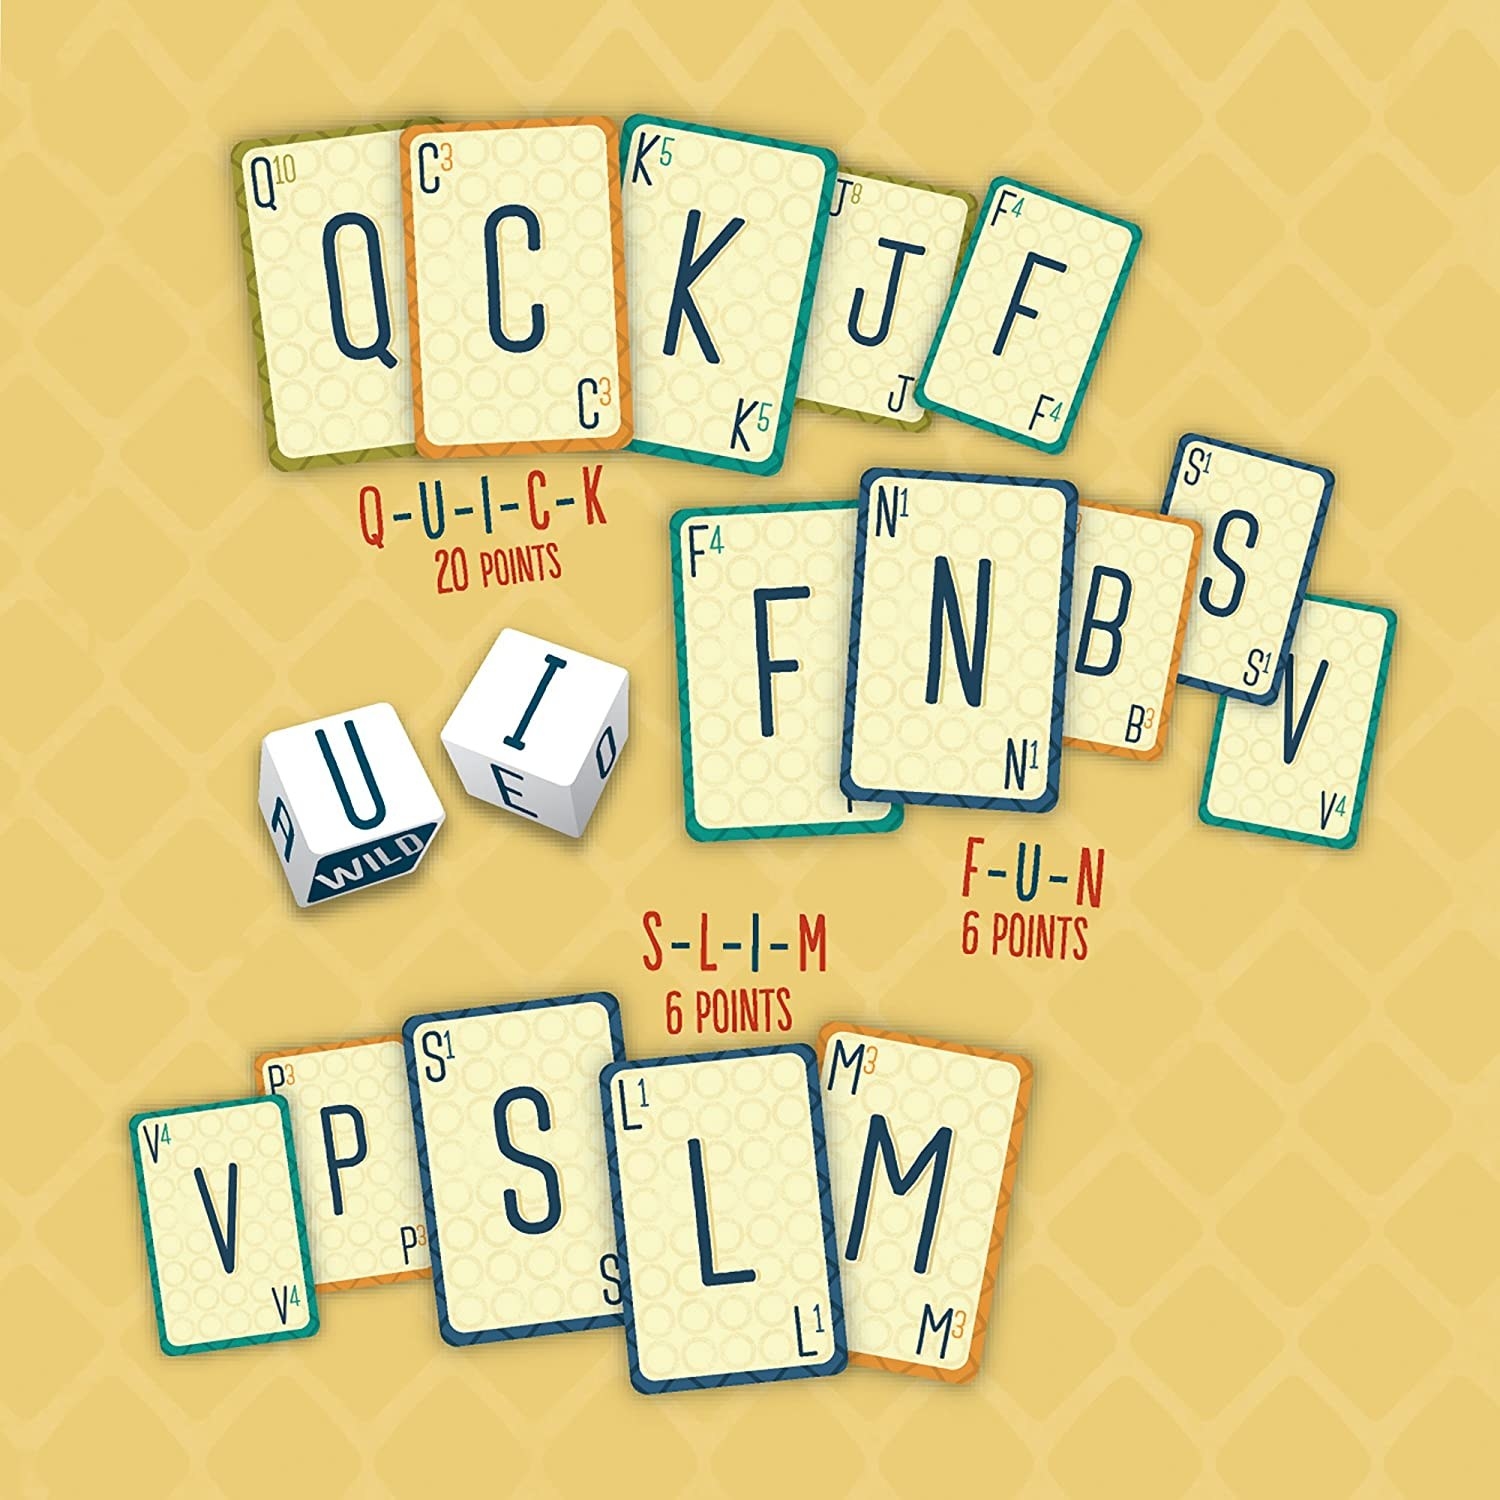 graphic showing potential words you can make from the consonants and vowels in the game